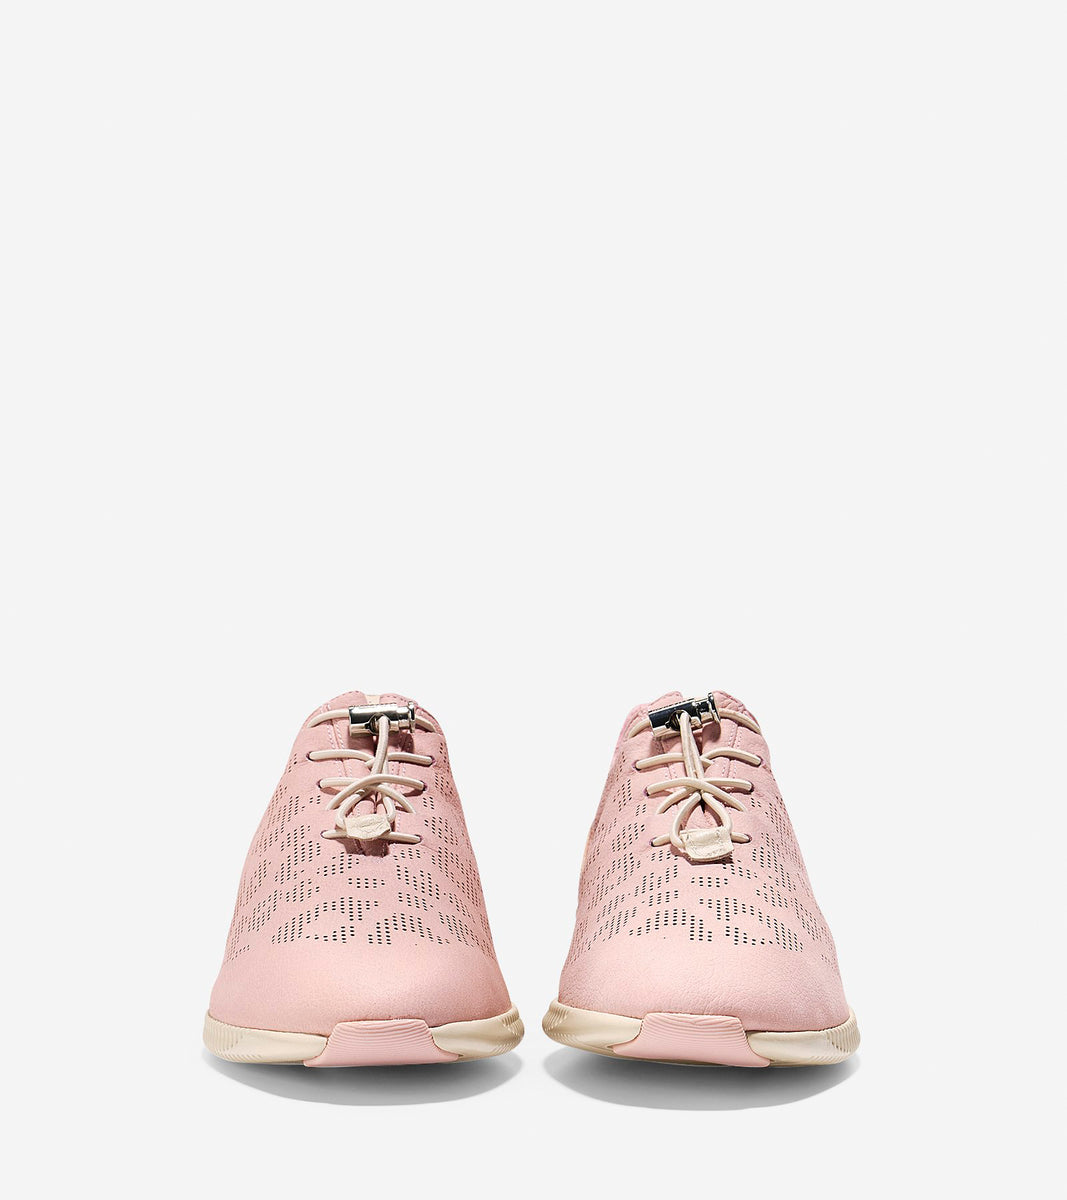 ColeHaan-StudiøGrand Pack-and-Go Sneaker-w06817-Silver Pink Perforated Ocelot Print Nubuck